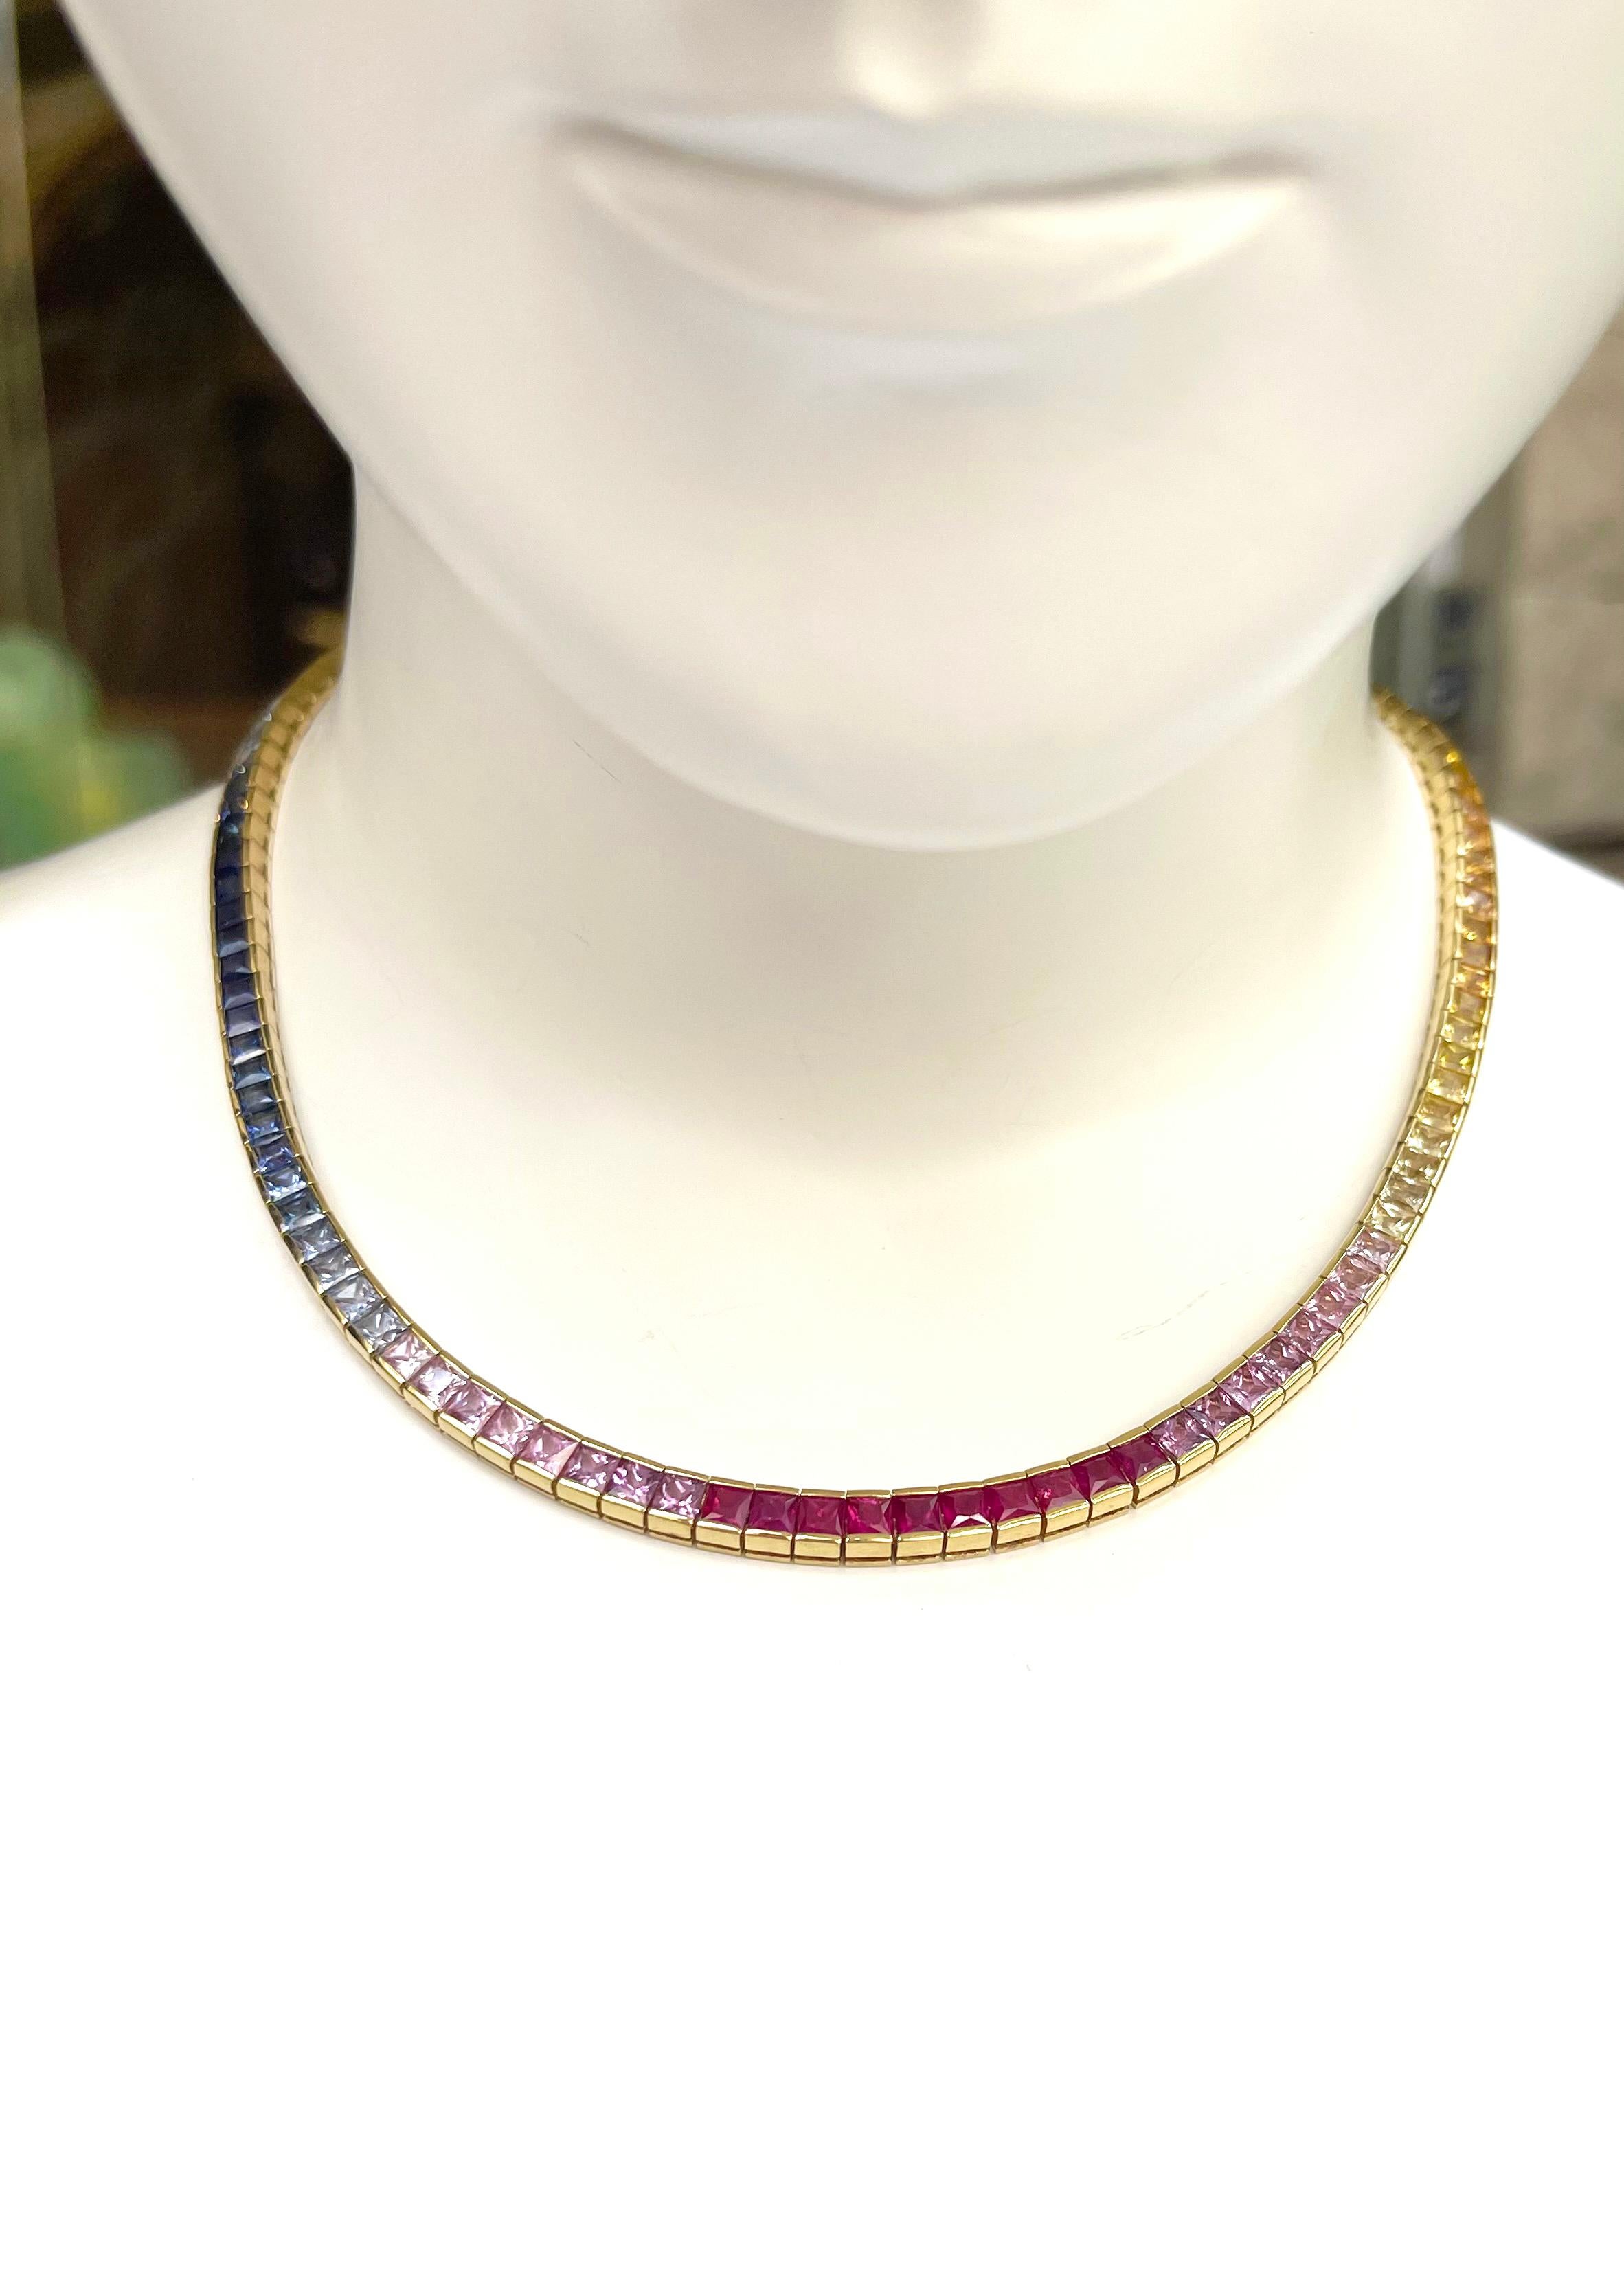 Multi Color Sapphire 34.52 carats Necklace set in 18K Gold Settings

Width: 0.5 cm 
Length: 41 cm
Total Weight: 52.86 grams

